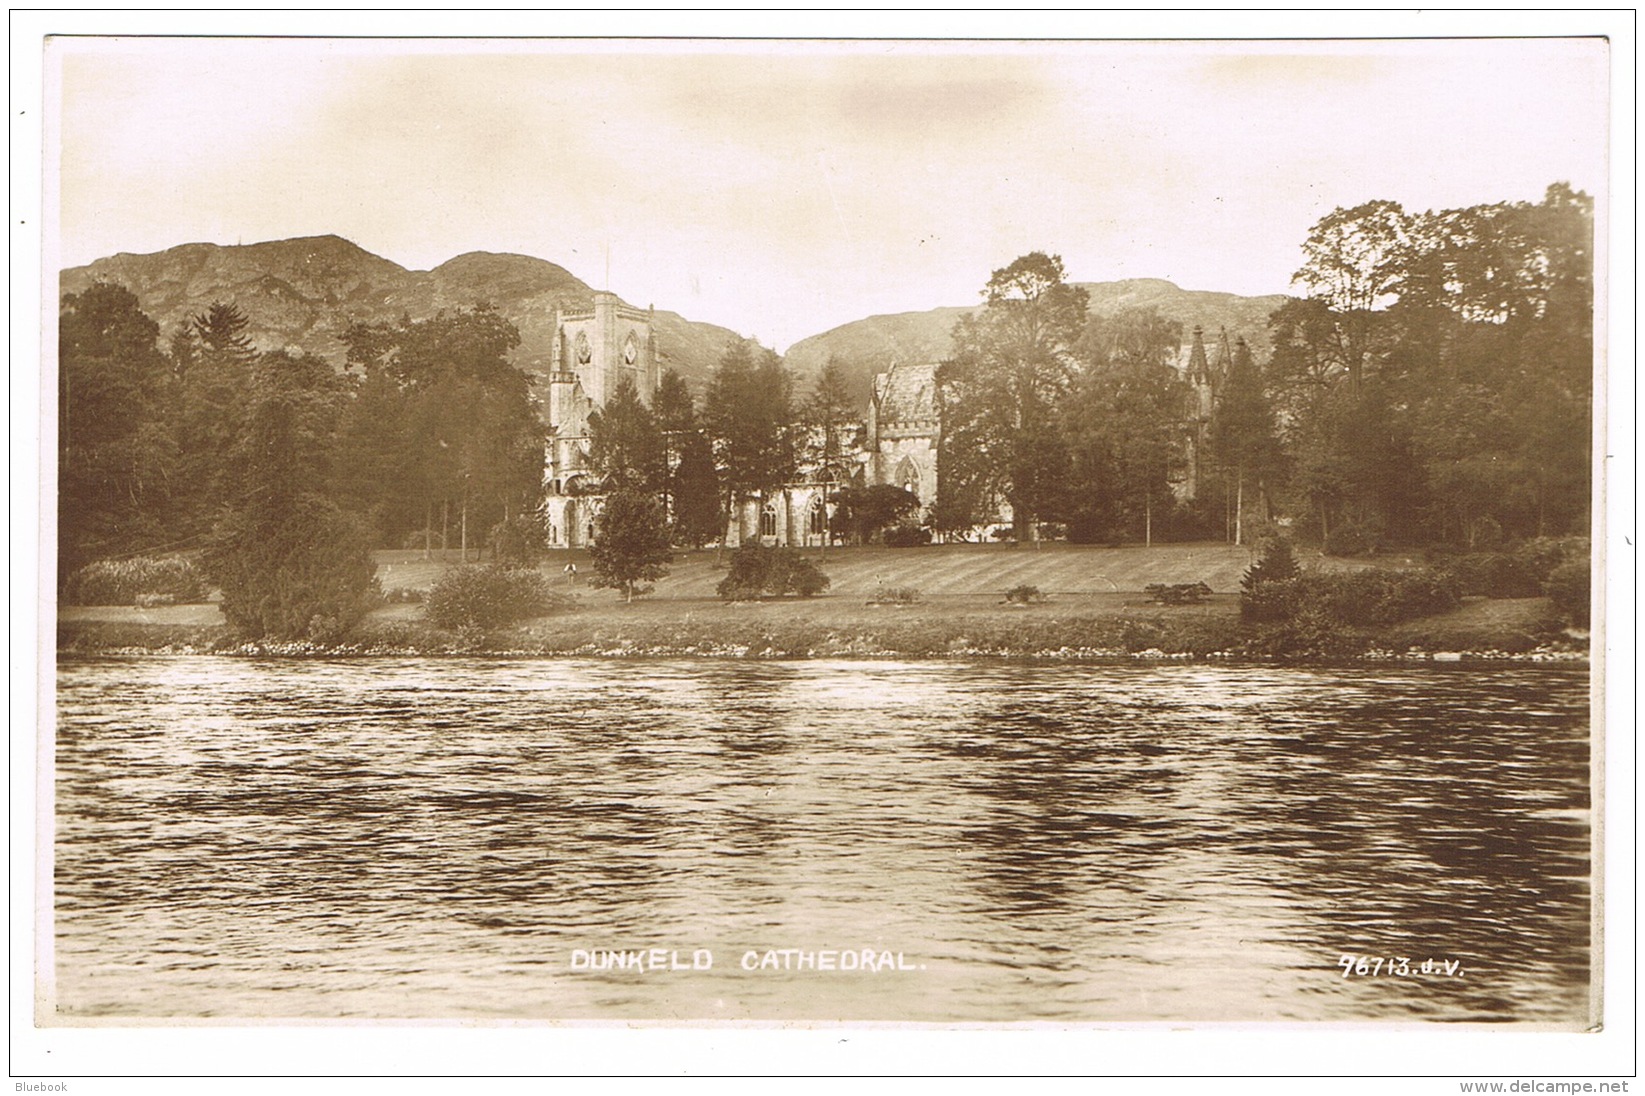 RB 1132 - Real Photo Postcard - Dunkeld Cathedral - Perthshire Scotland - Perthshire